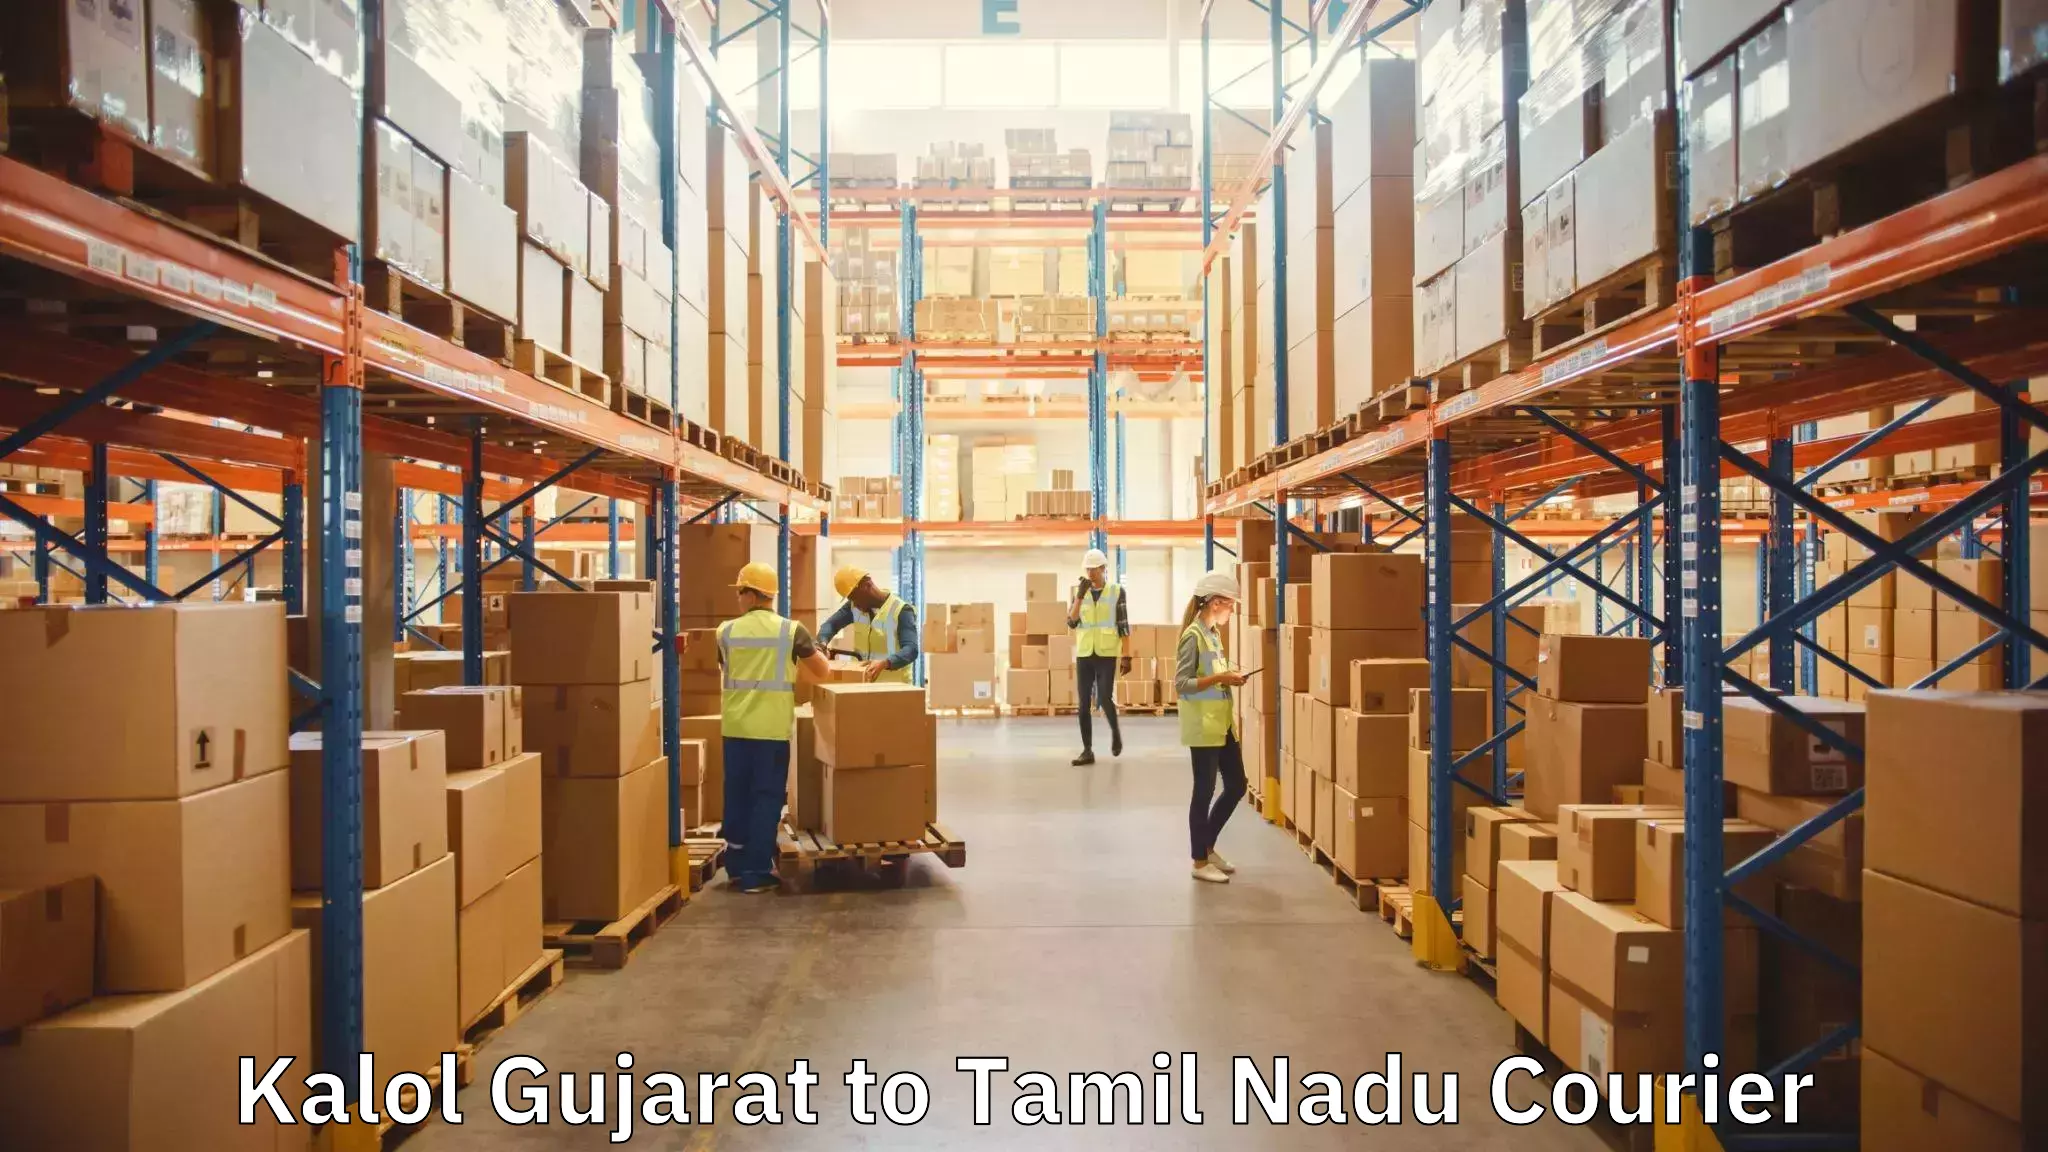 Quality relocation assistance Kalol Gujarat to Ennore Port Chennai